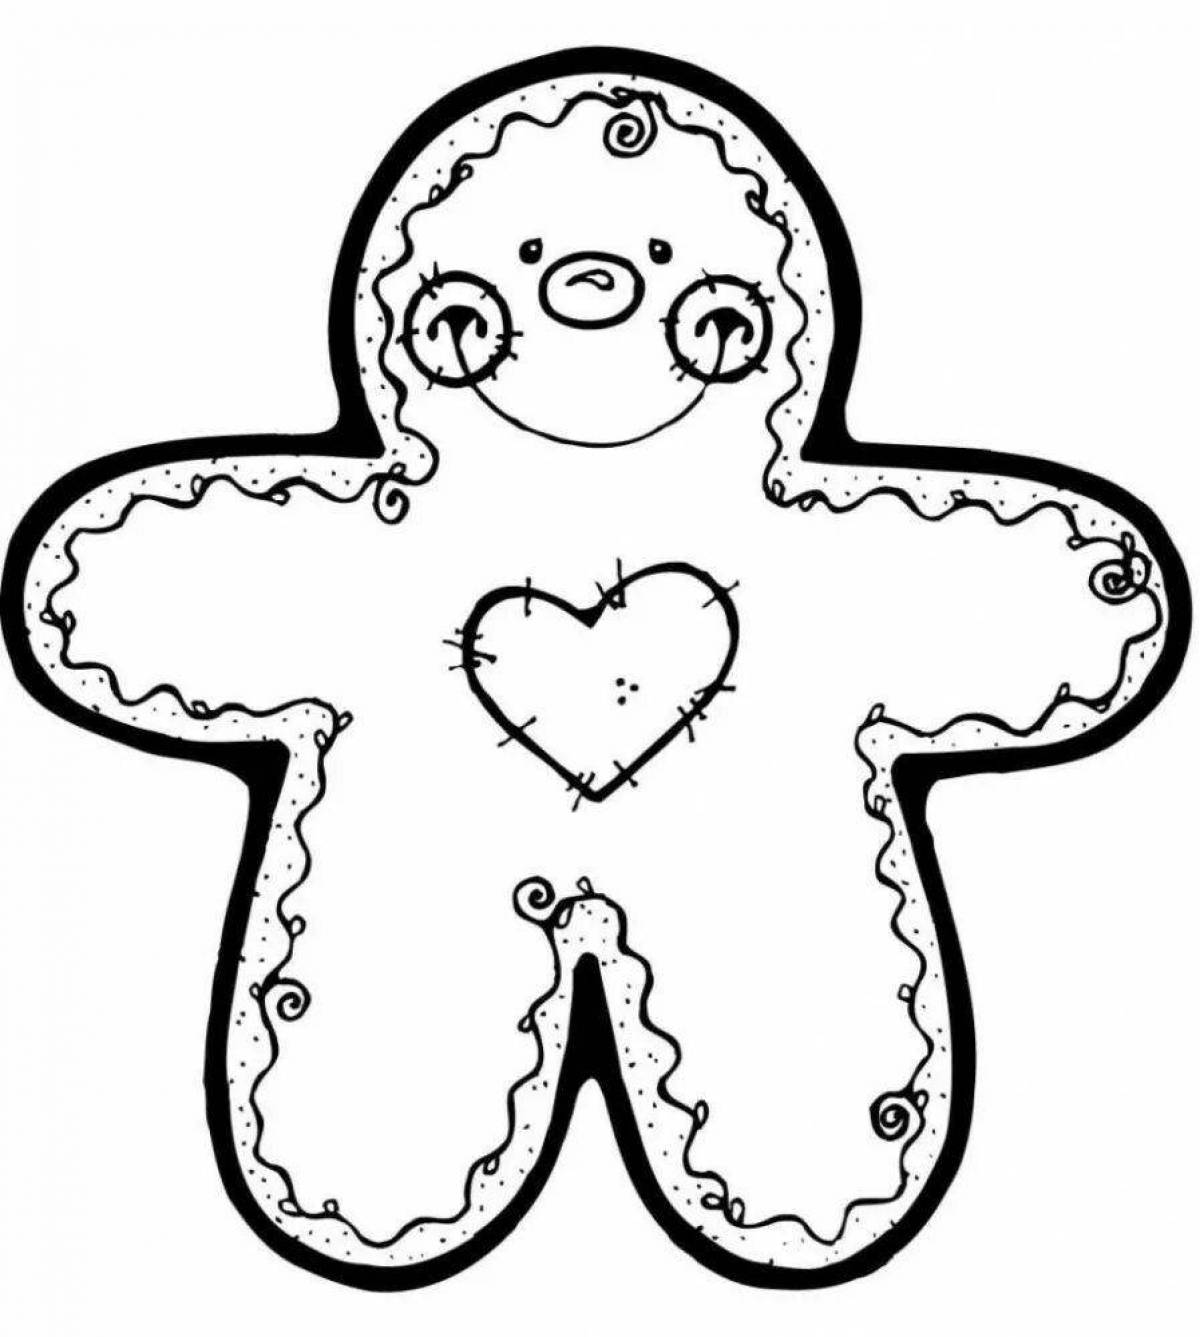 Gingerbread for kids #18